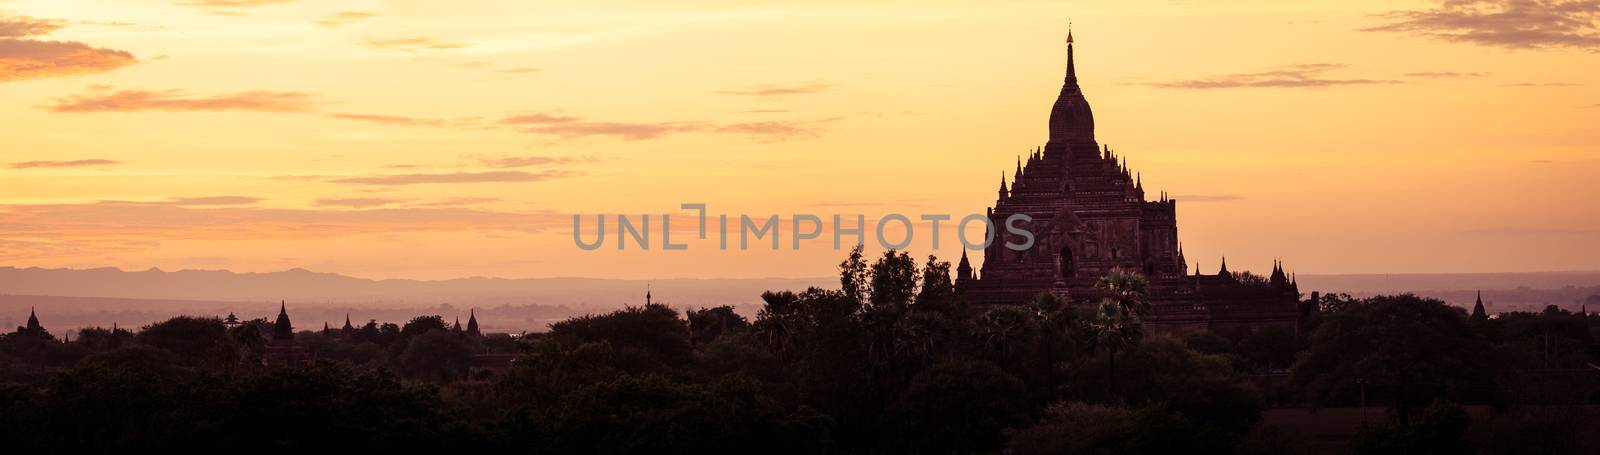 Panoramic landscape view of ancient temples silhouette at colorful golden sunset, Bagan, Myanmar